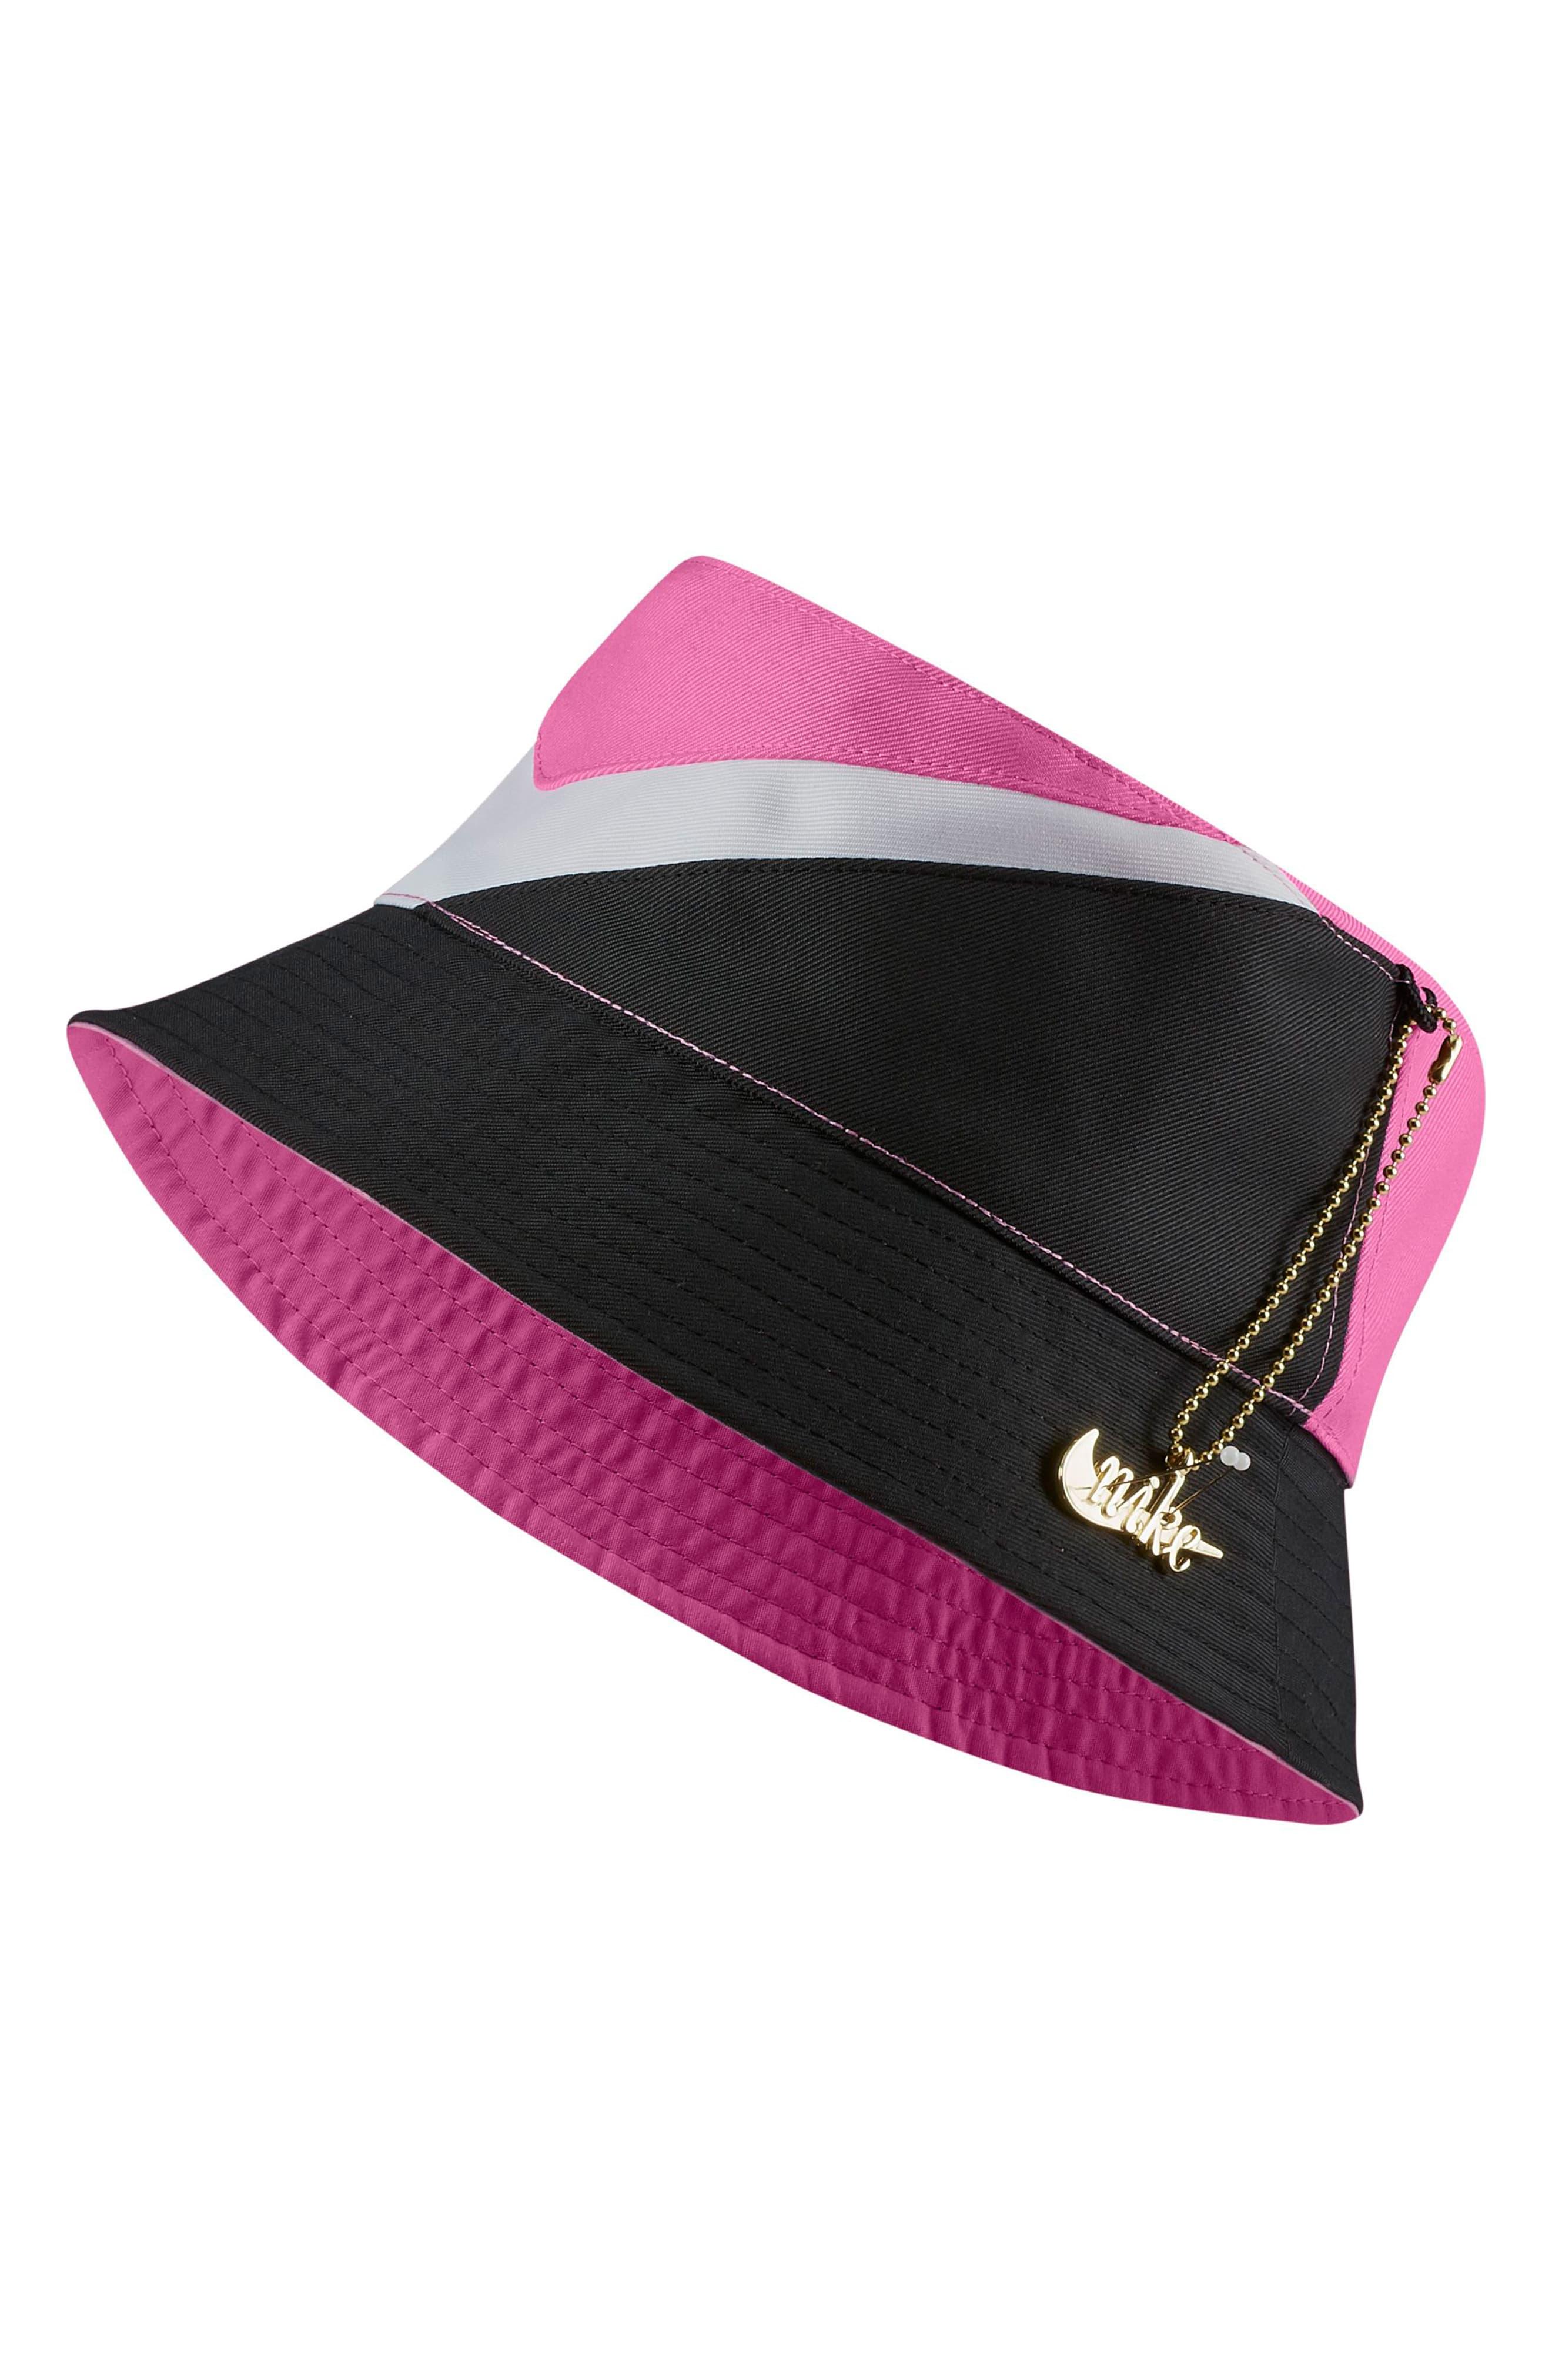 black and pink nike hat